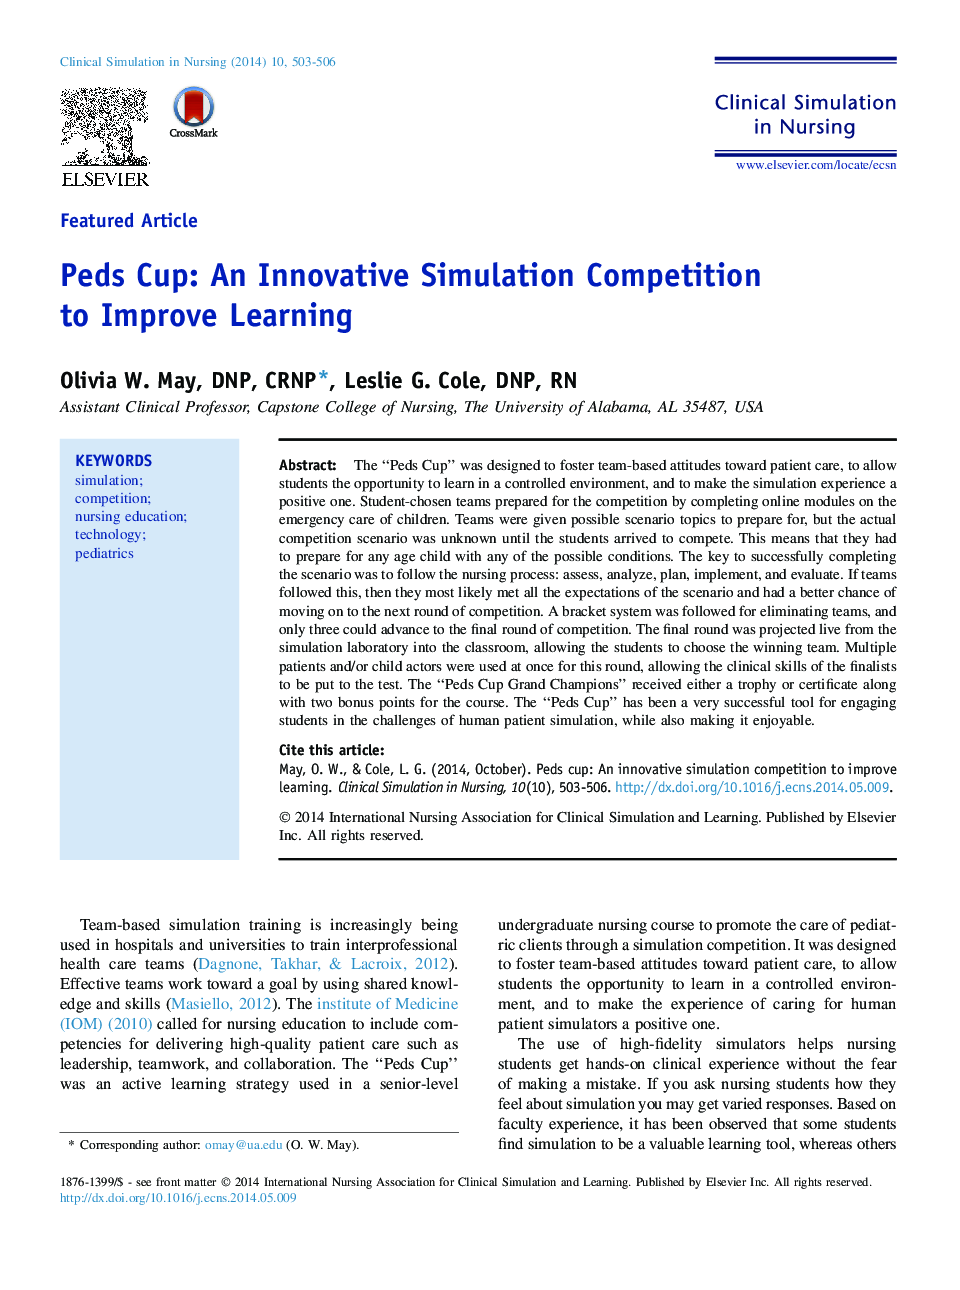 Peds Cup: An Innovative Simulation Competition to Improve Learning